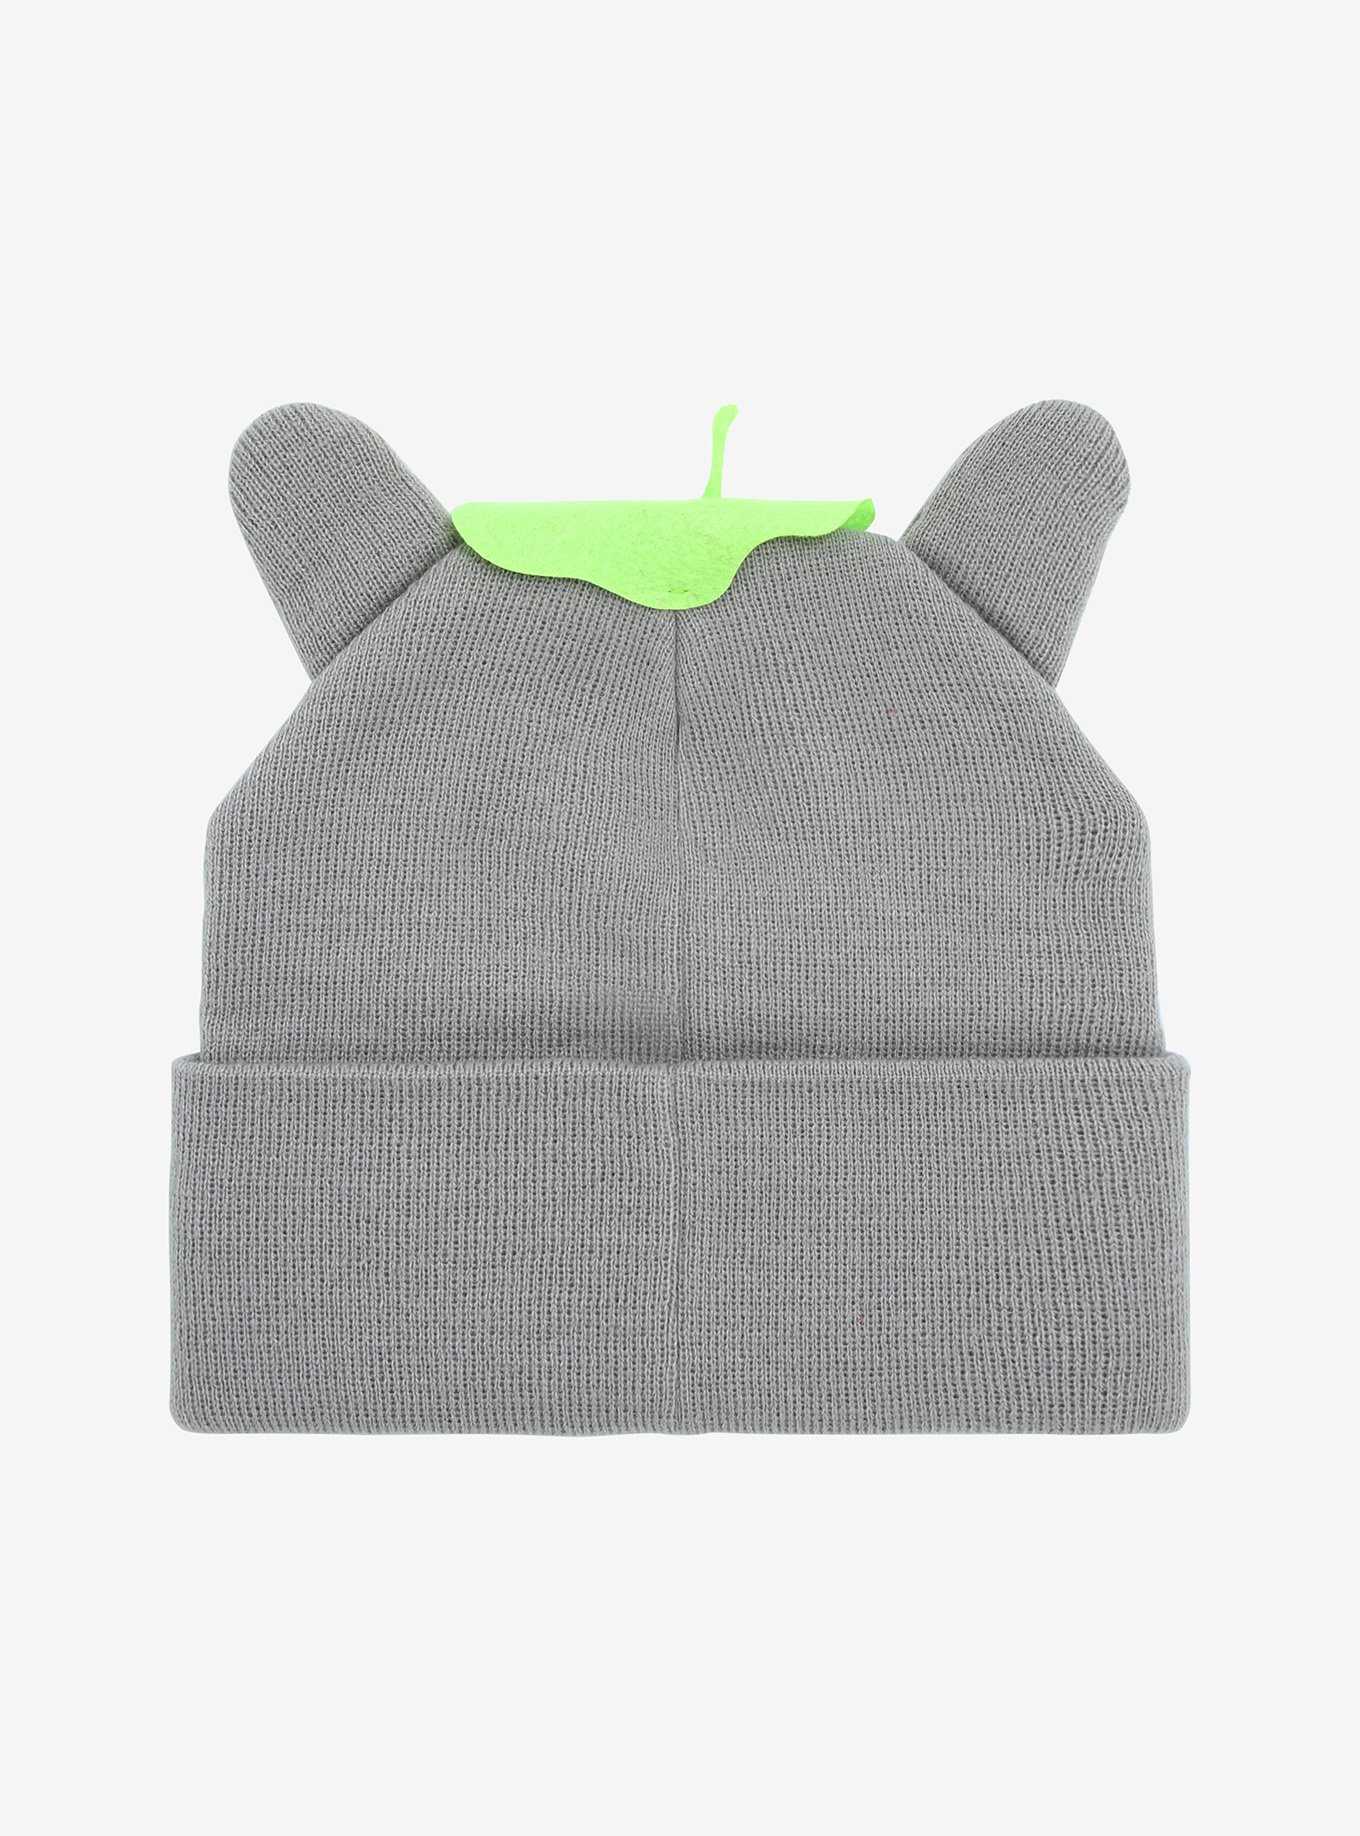 Cool Beanies: Slouchy, Trendy & Pop Culture Beanies | BoxLunch